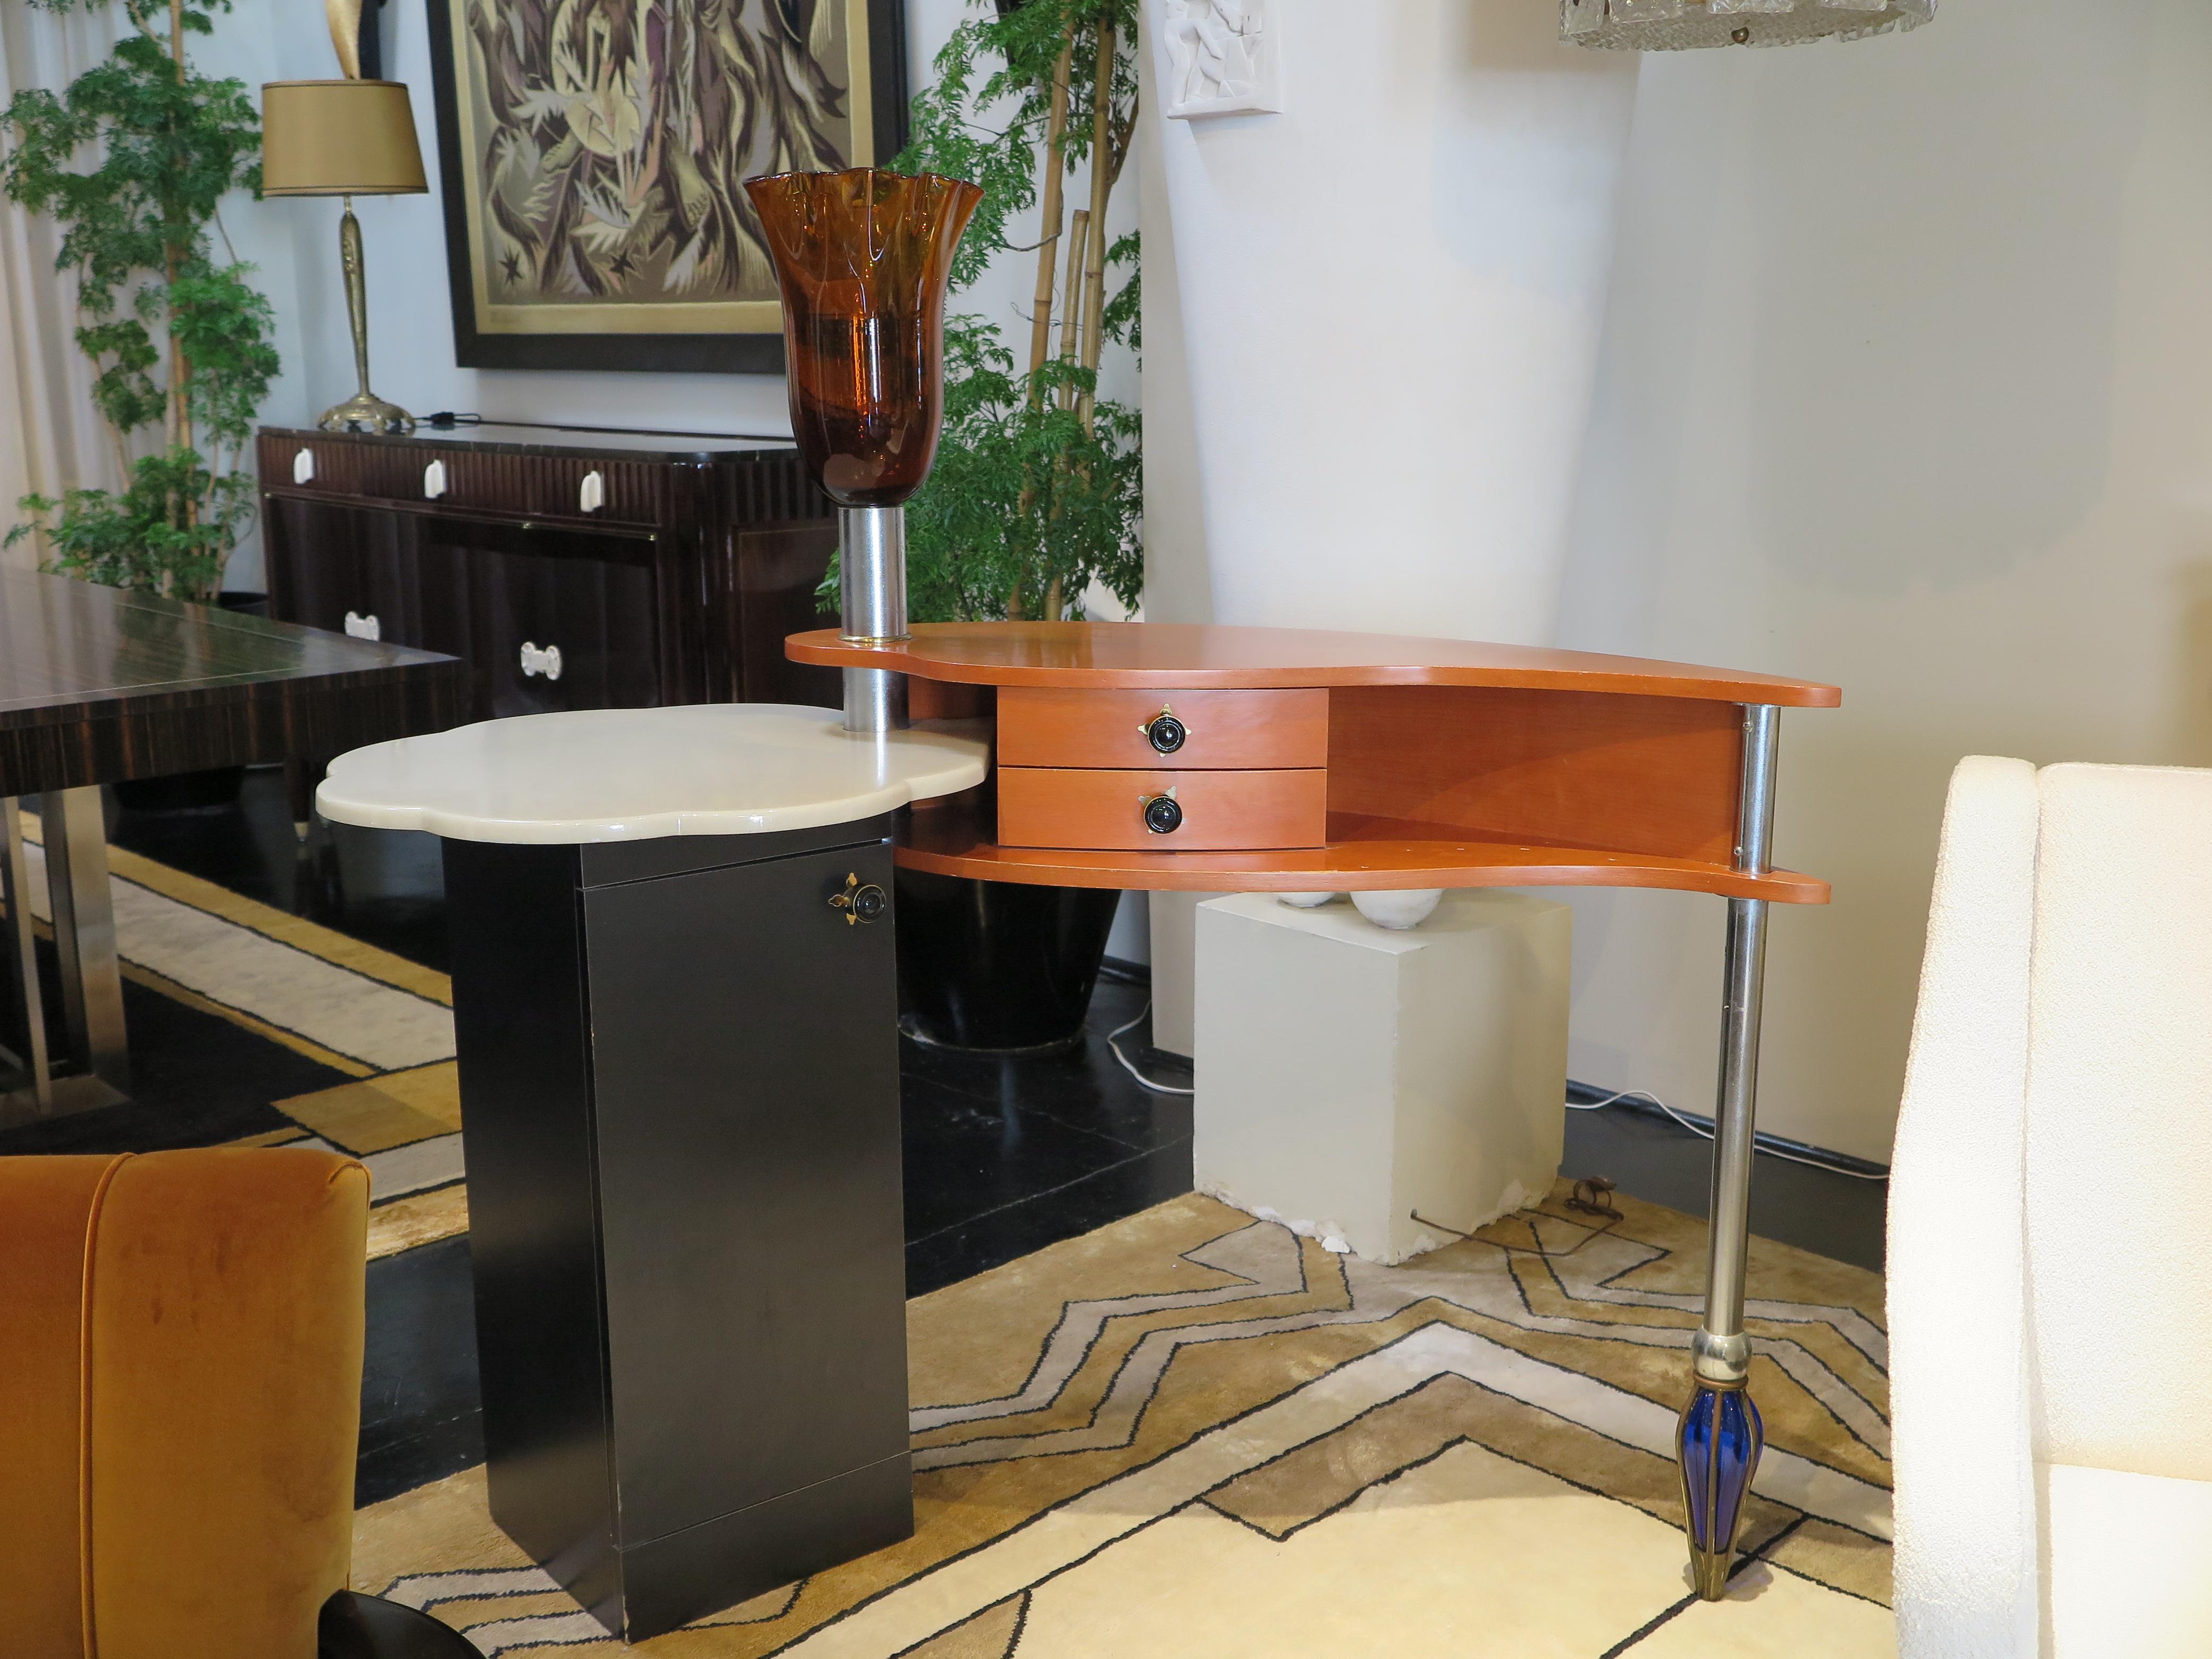 Italian Mid-Century console/occasional table with curved cherry wood desk top adjoined by a scalloped white granite on an anthracite lacquer pedestal base with storage. A hand-blown orange tulip glass joins the two-tired table top. A blue glass